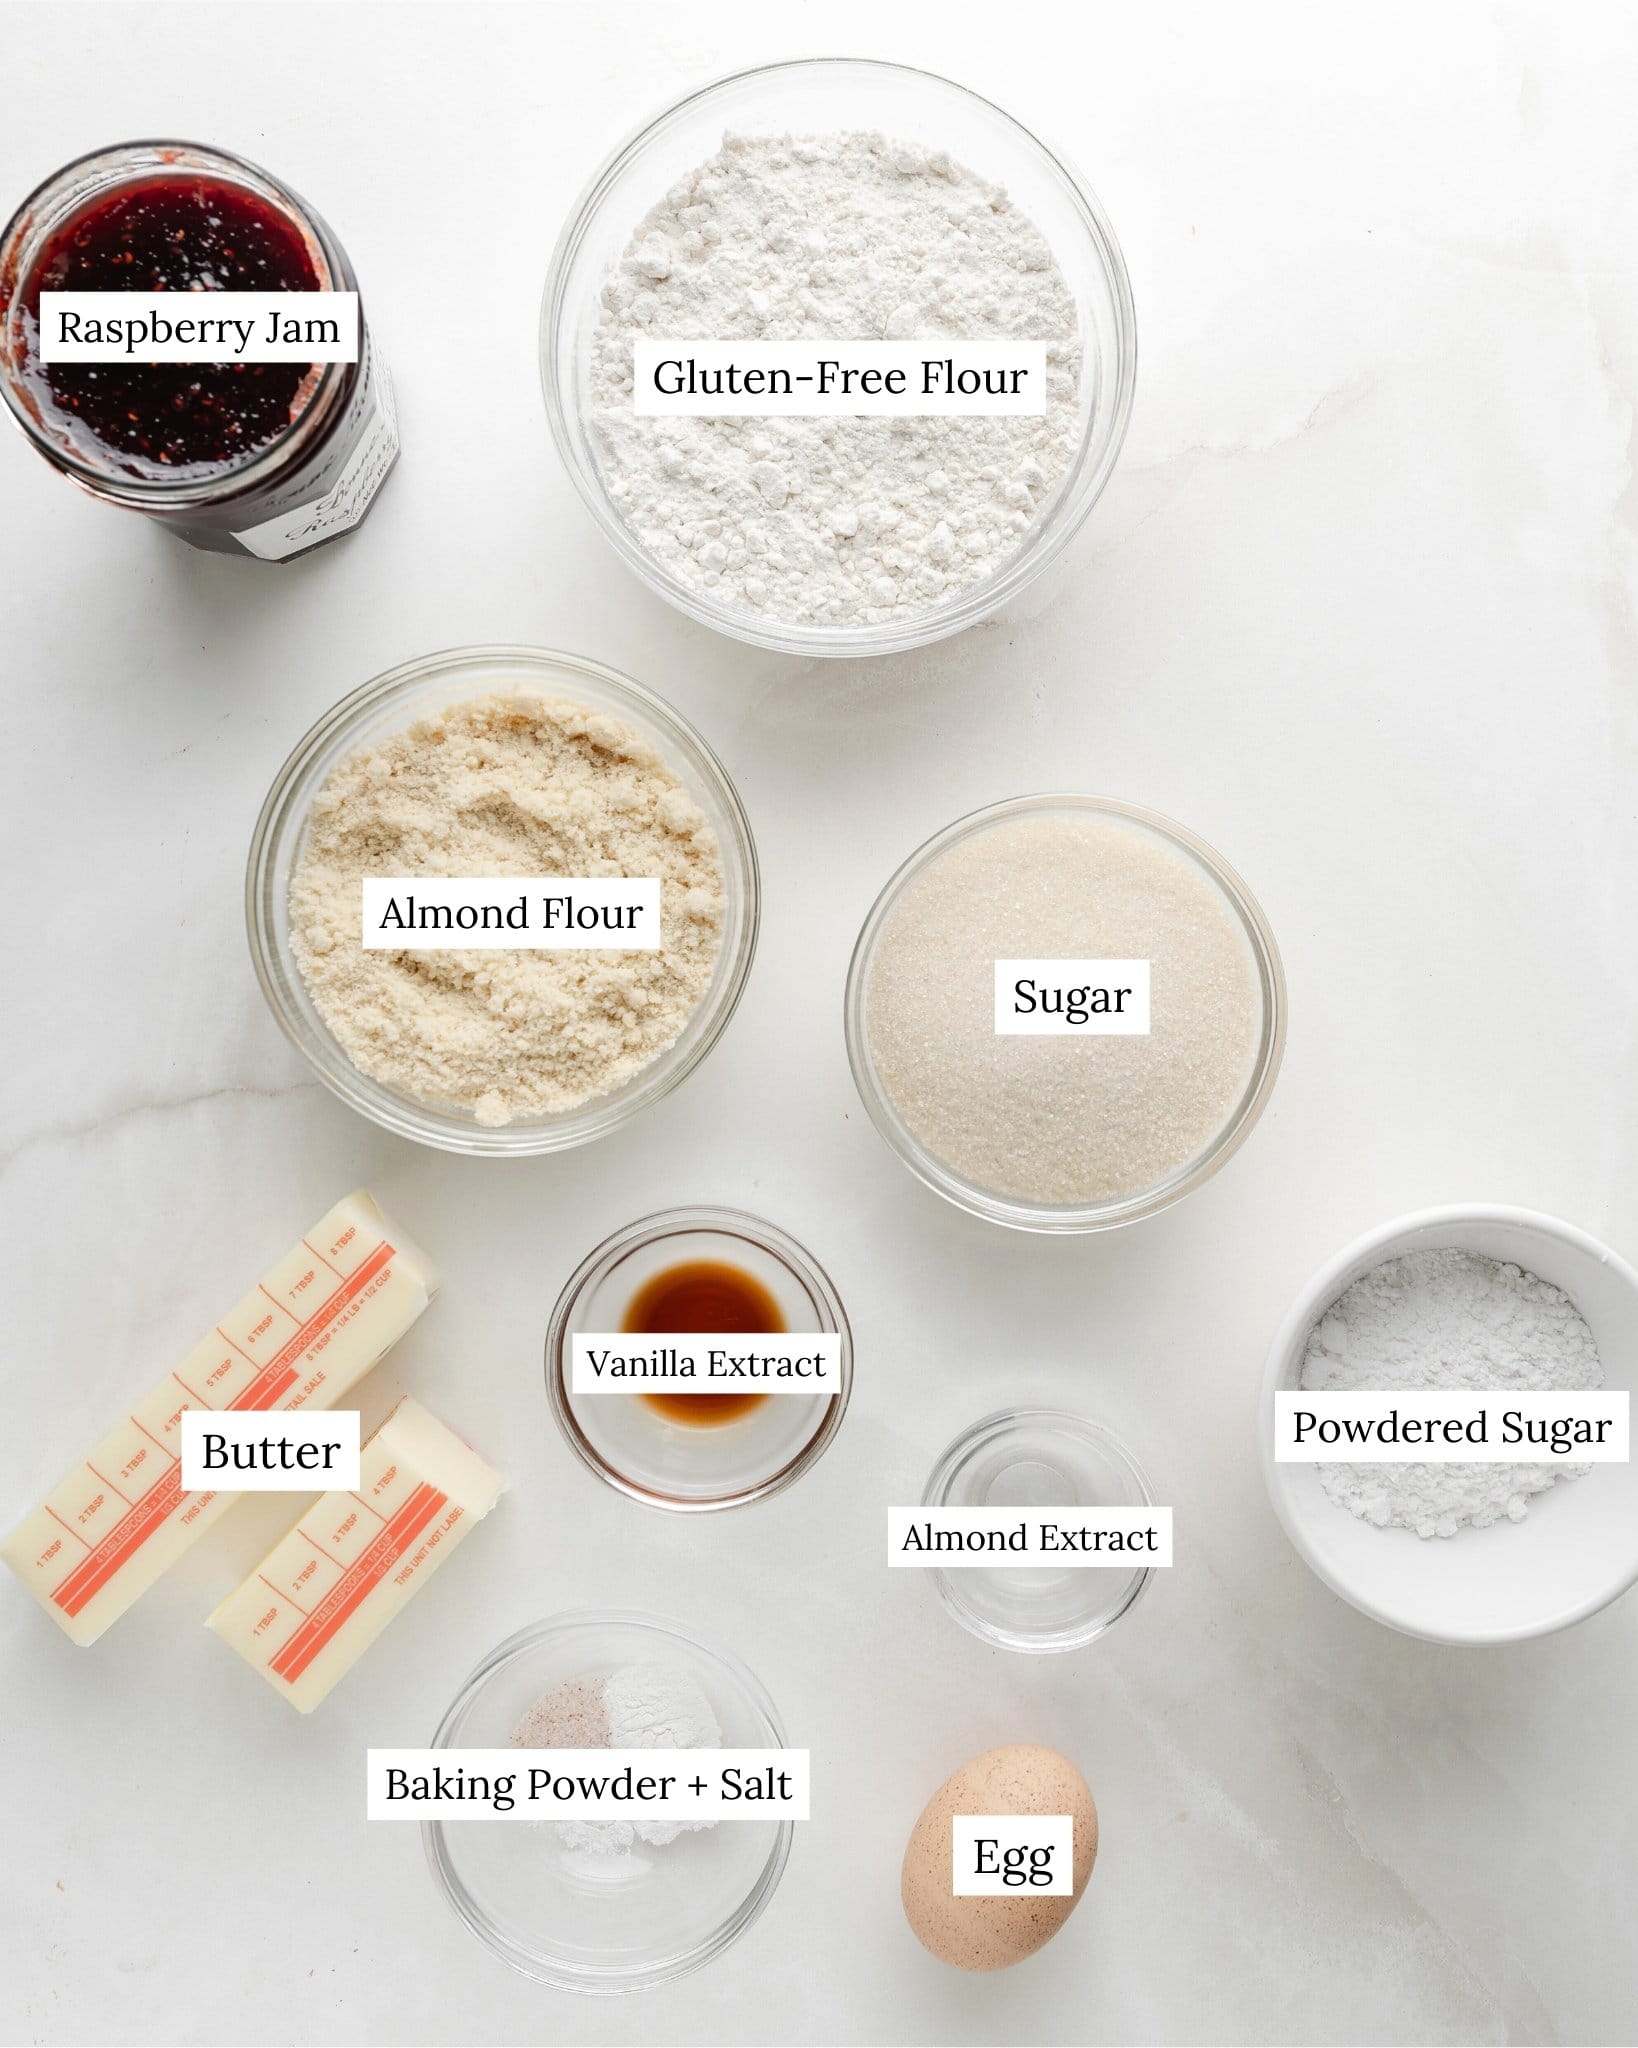 Ingredients for gluten-free linzer cookies. Gluten-free flour in a clear bowl, sugar, vanilla extract, almond extract, baking powder, salt, butter, egg, almond flour, and powdered sugar.